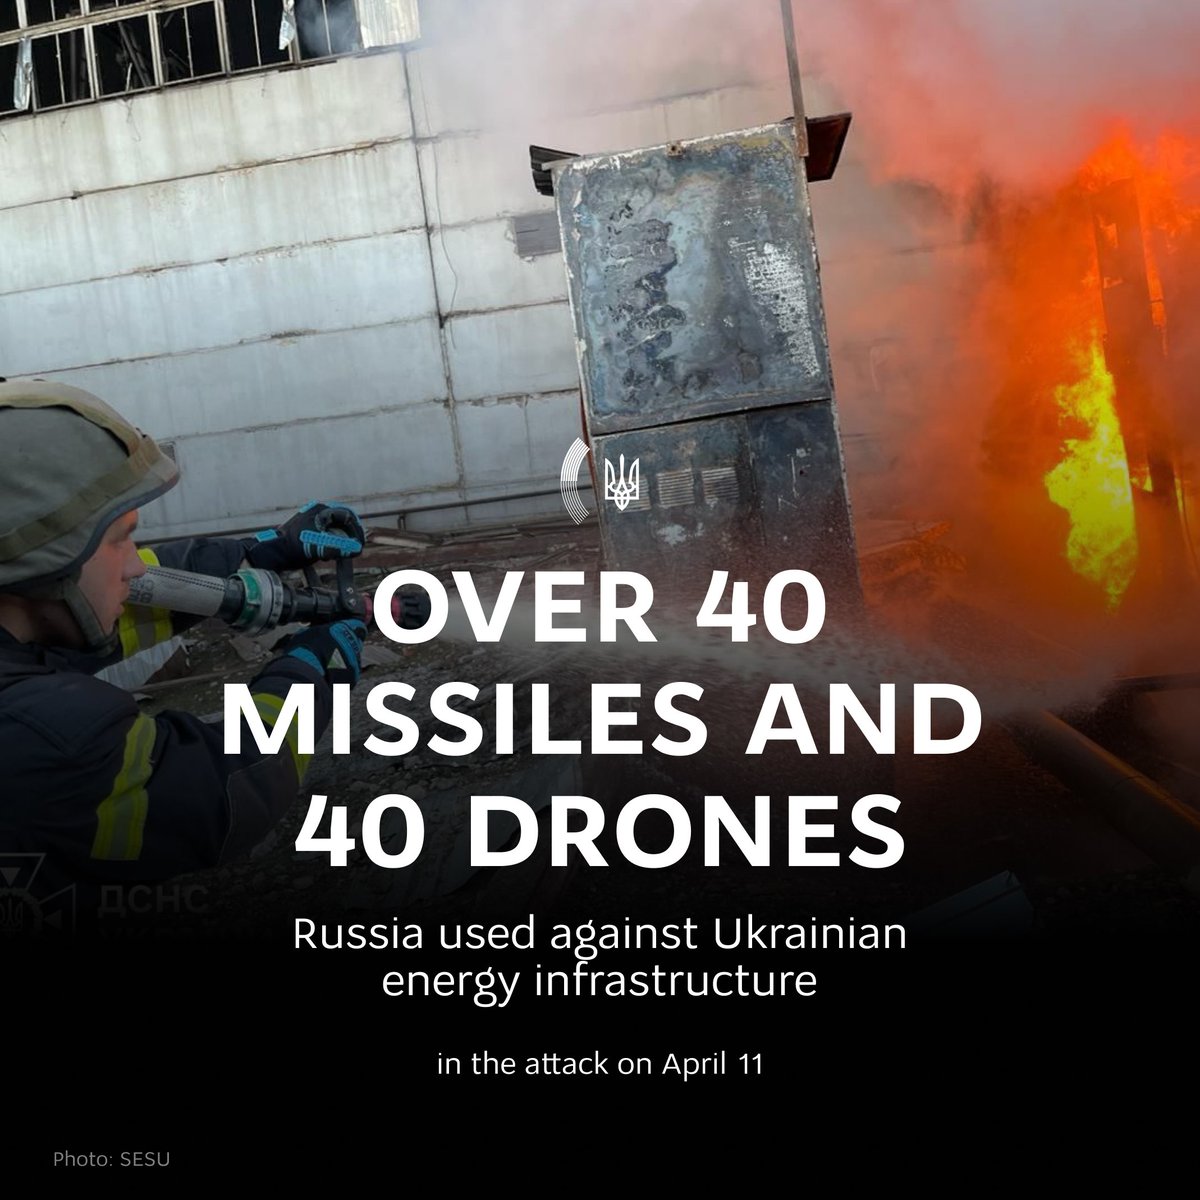 In tonight's attack, Russia targeted Ukraine's critical infrastructure in Kharkiv, Odesa, Lviv, Zaporizhzhia, and Kyiv regions with 40 drones and over 40 missiles A strong air shield in Ukraine and more Patriots systems and missiles for them are needed because #PatriotsSaveLives